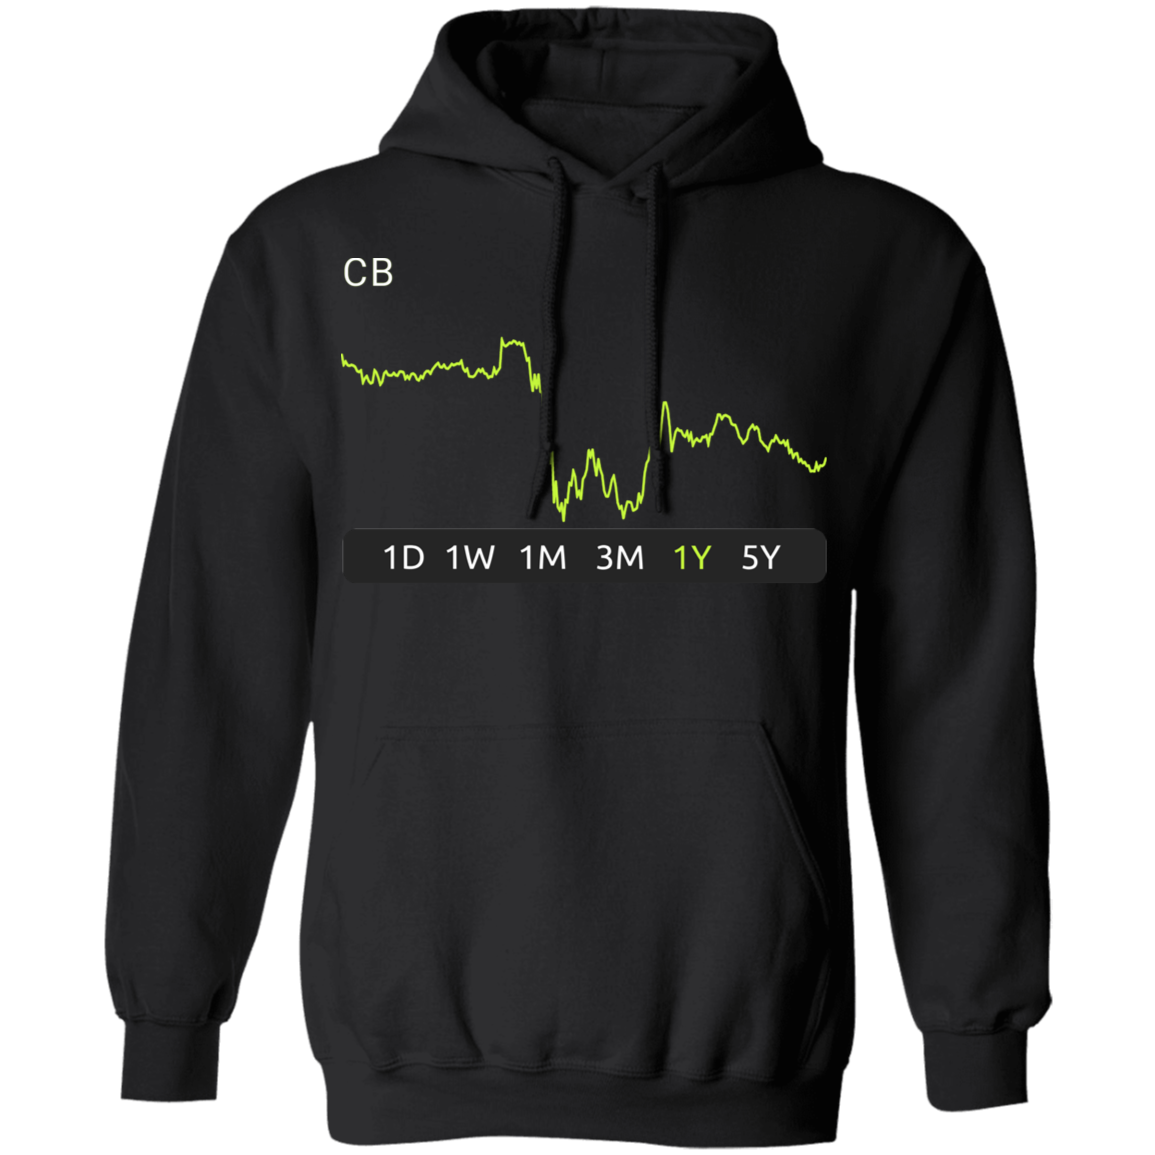 CB Stock 1y Pullover Hoodie